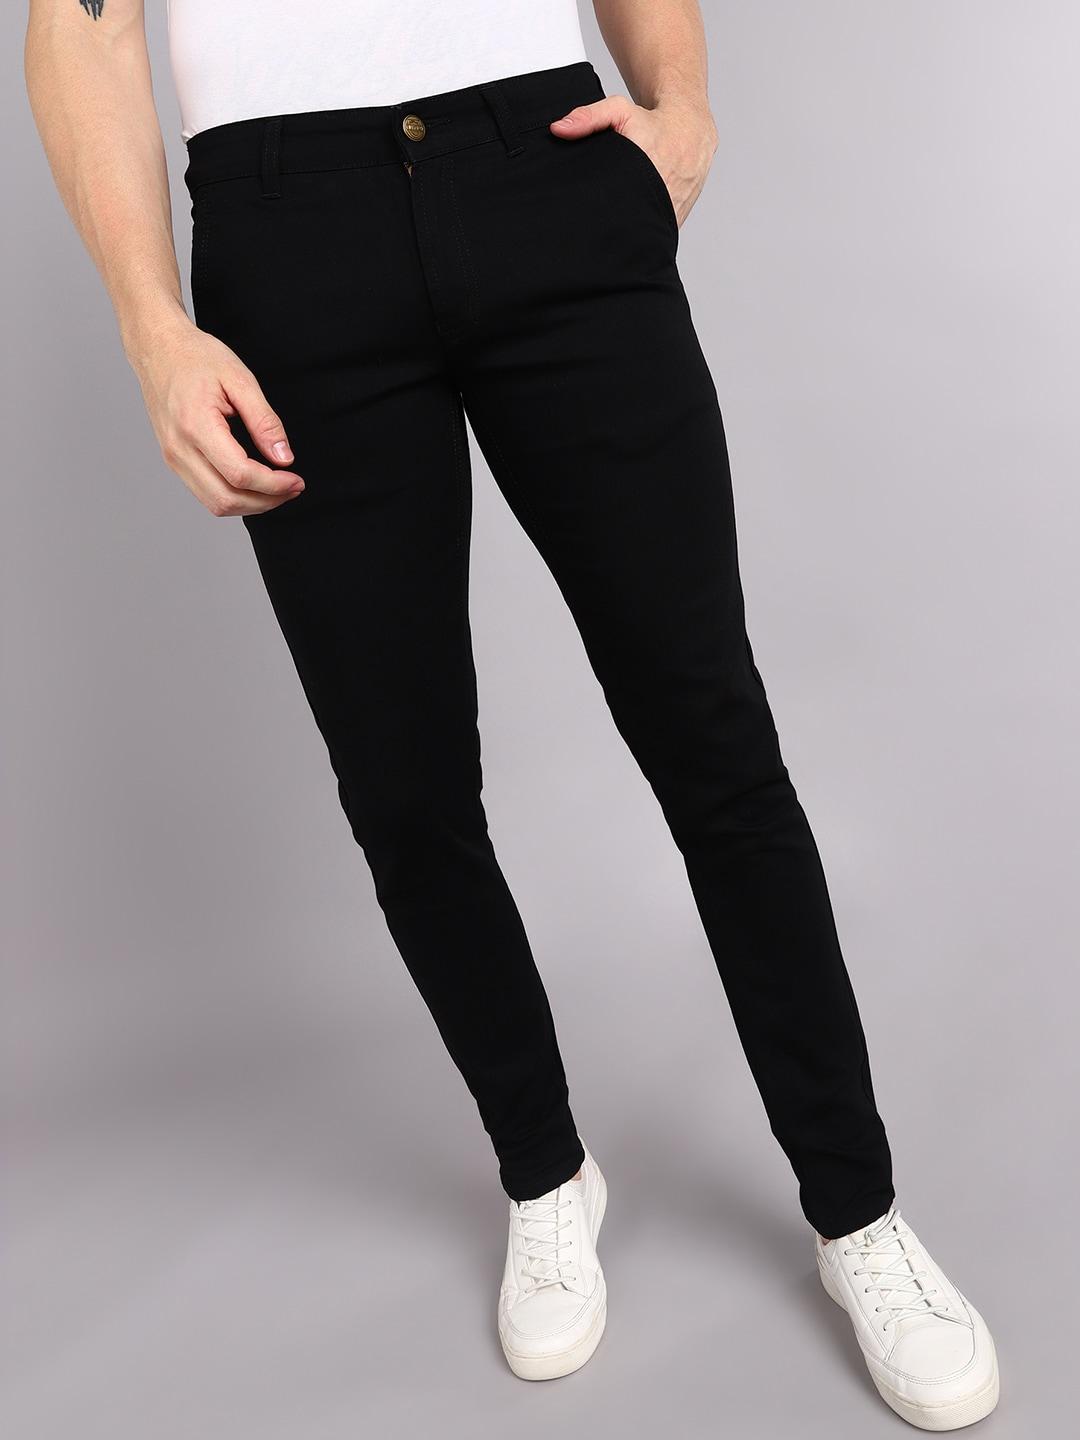 urbano-fashion-men-black-slim-fit-mid-rise-clean-look-stretchable-jeans